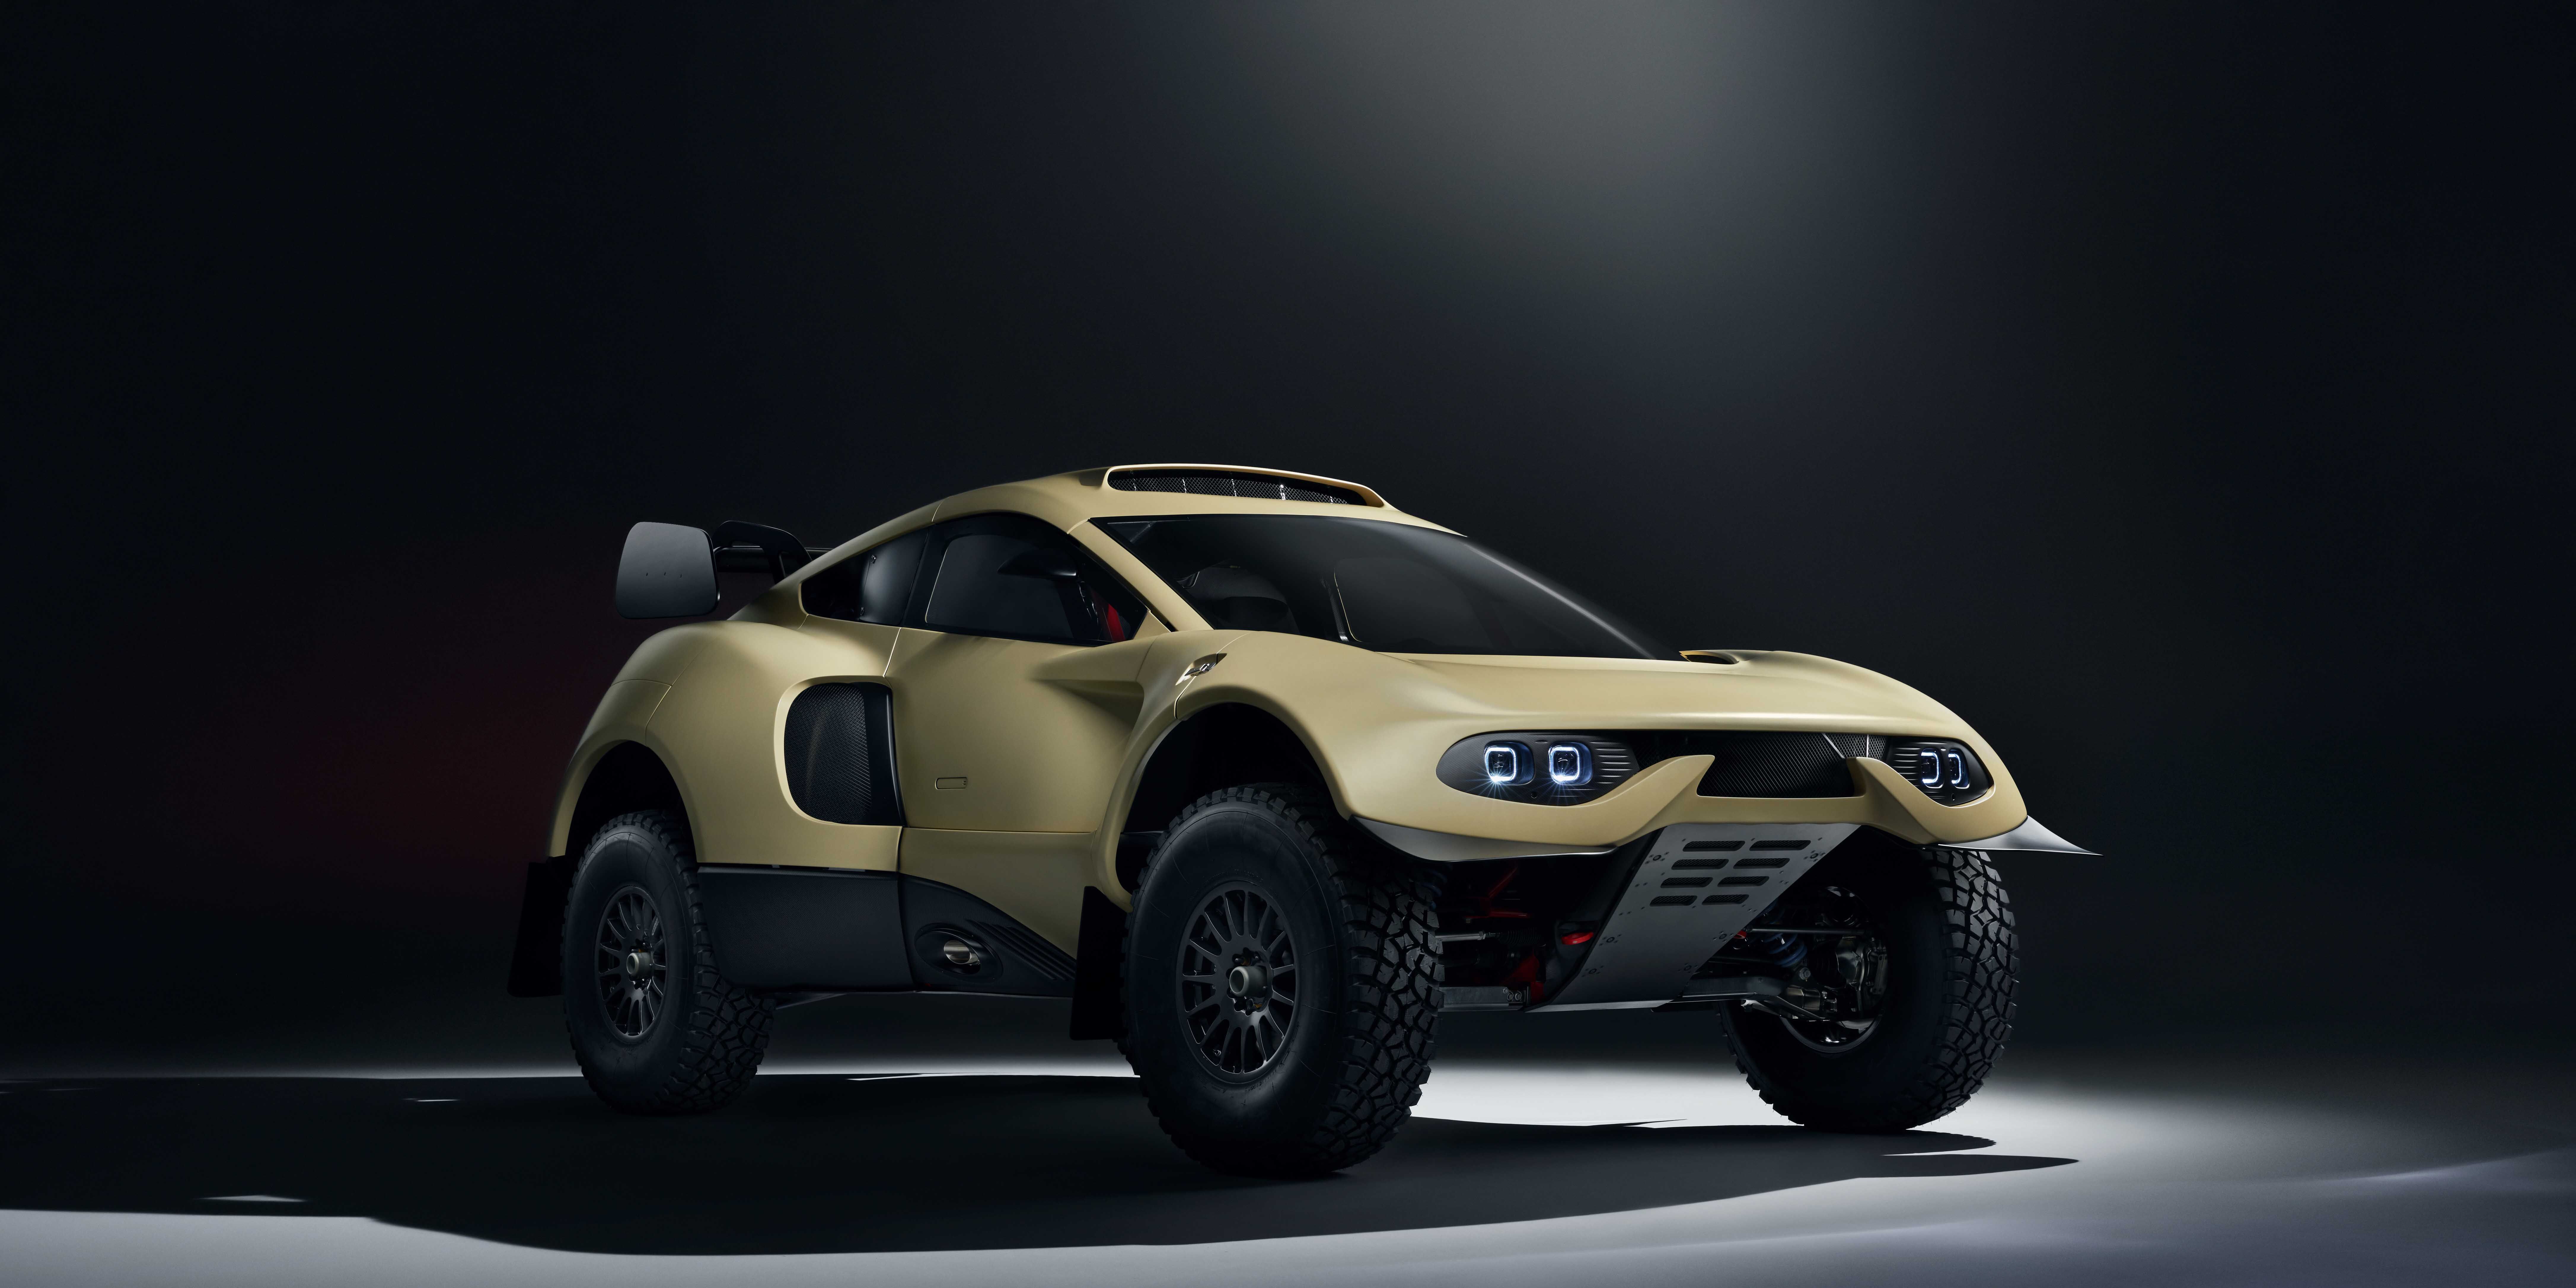 The Prodrive Hunter Is a 600-HP Road-Going Version of the Company's Dakar Racer